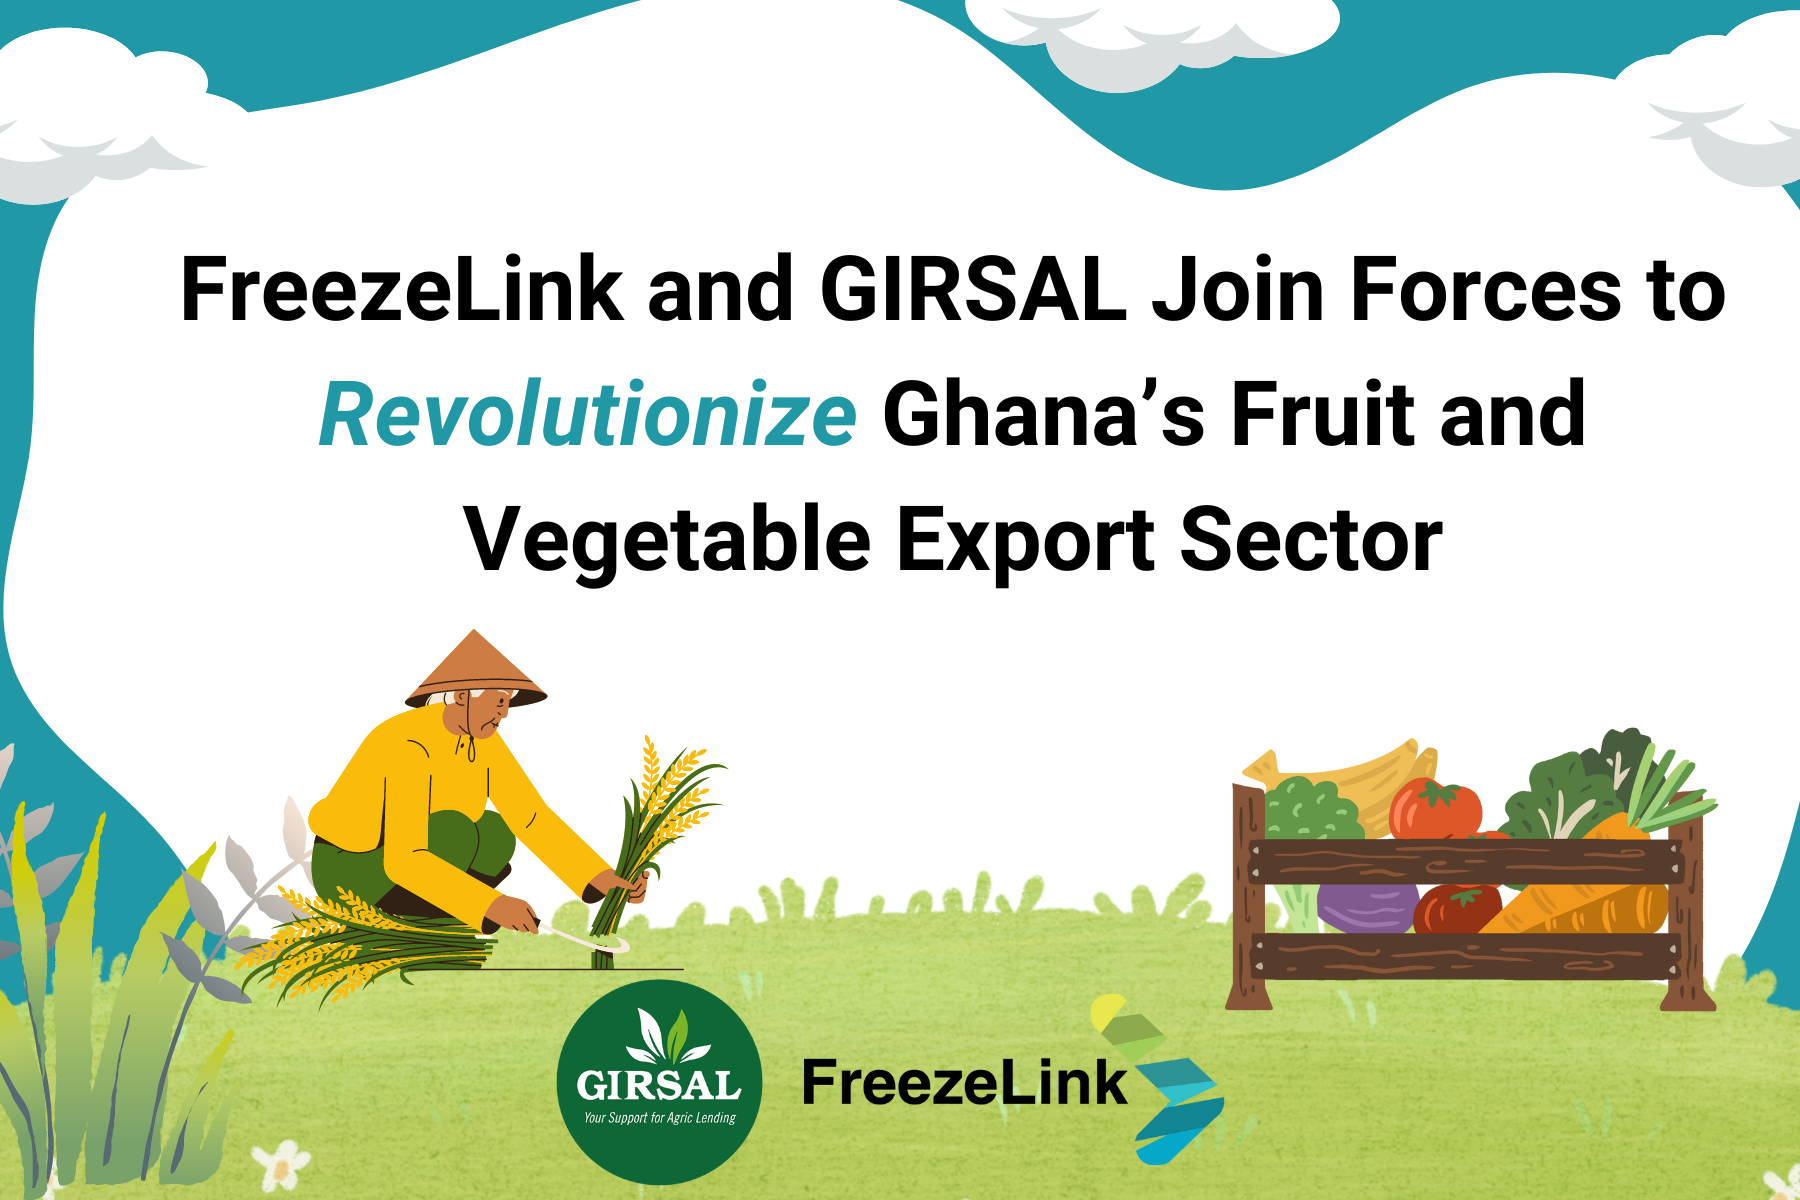 FreezeLink-and-Girsal-revolutionuze-Agric-Industry-in-Ghana